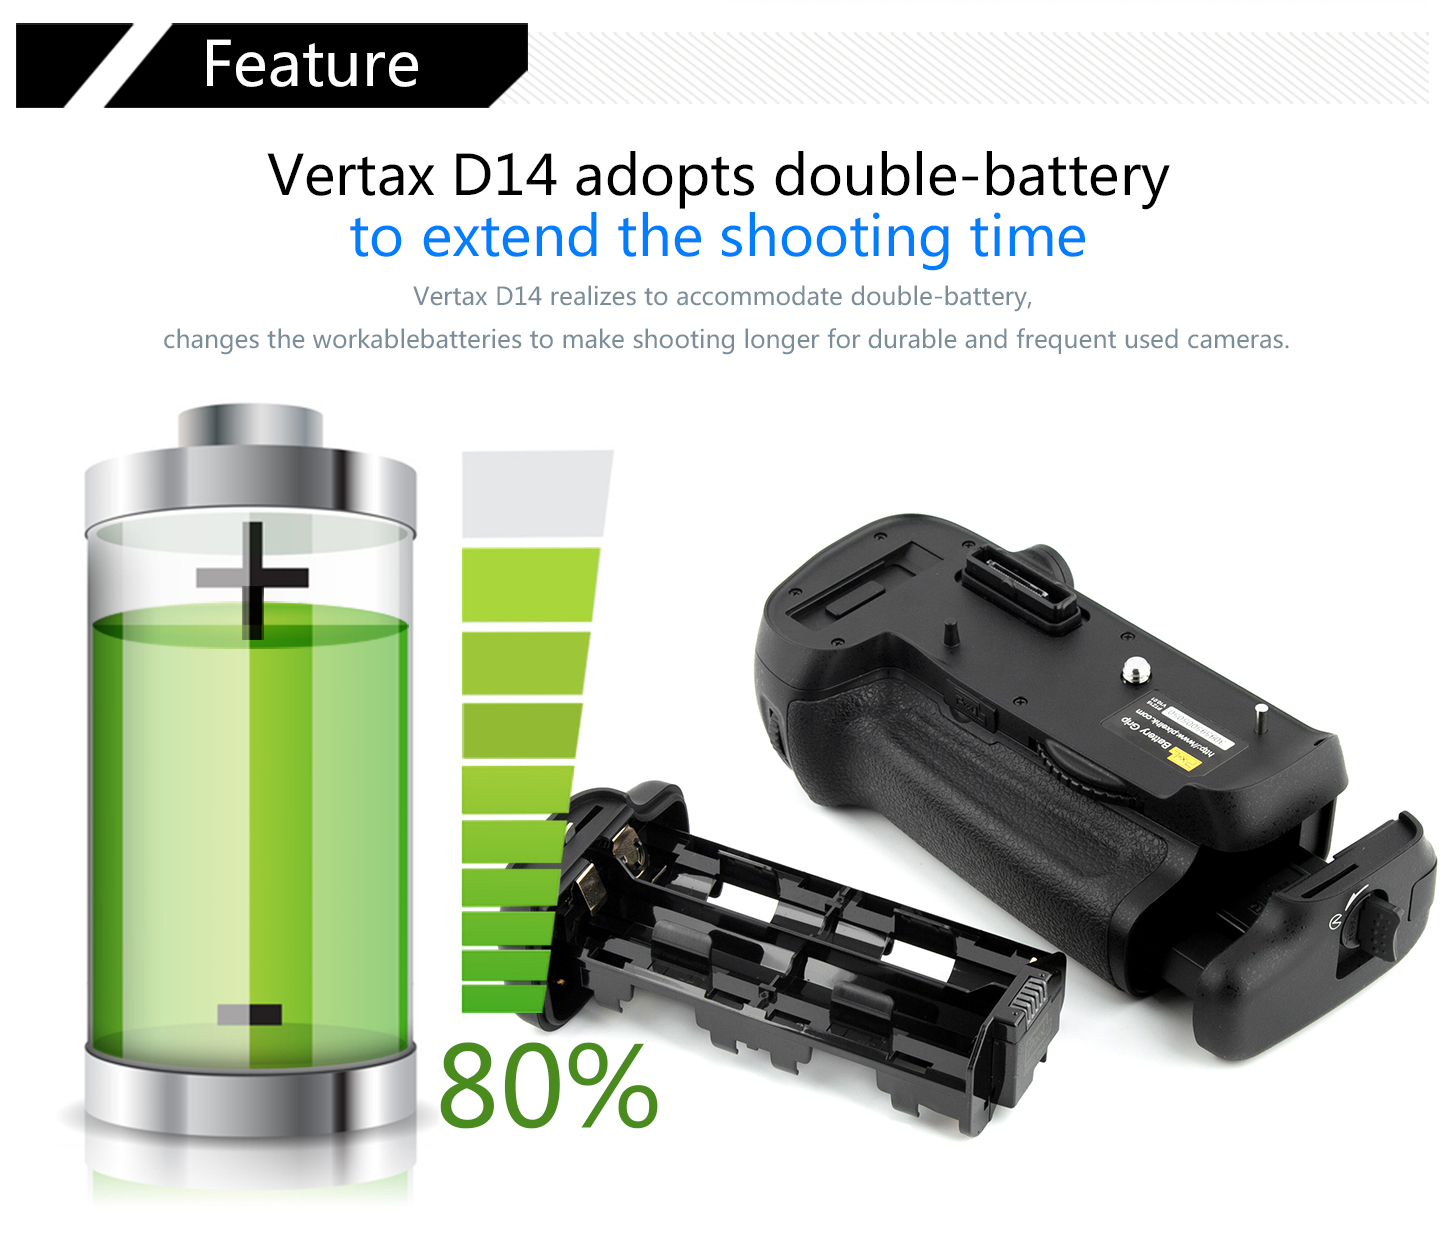 Vretax D14 adopts double-battery to extend the shooting time